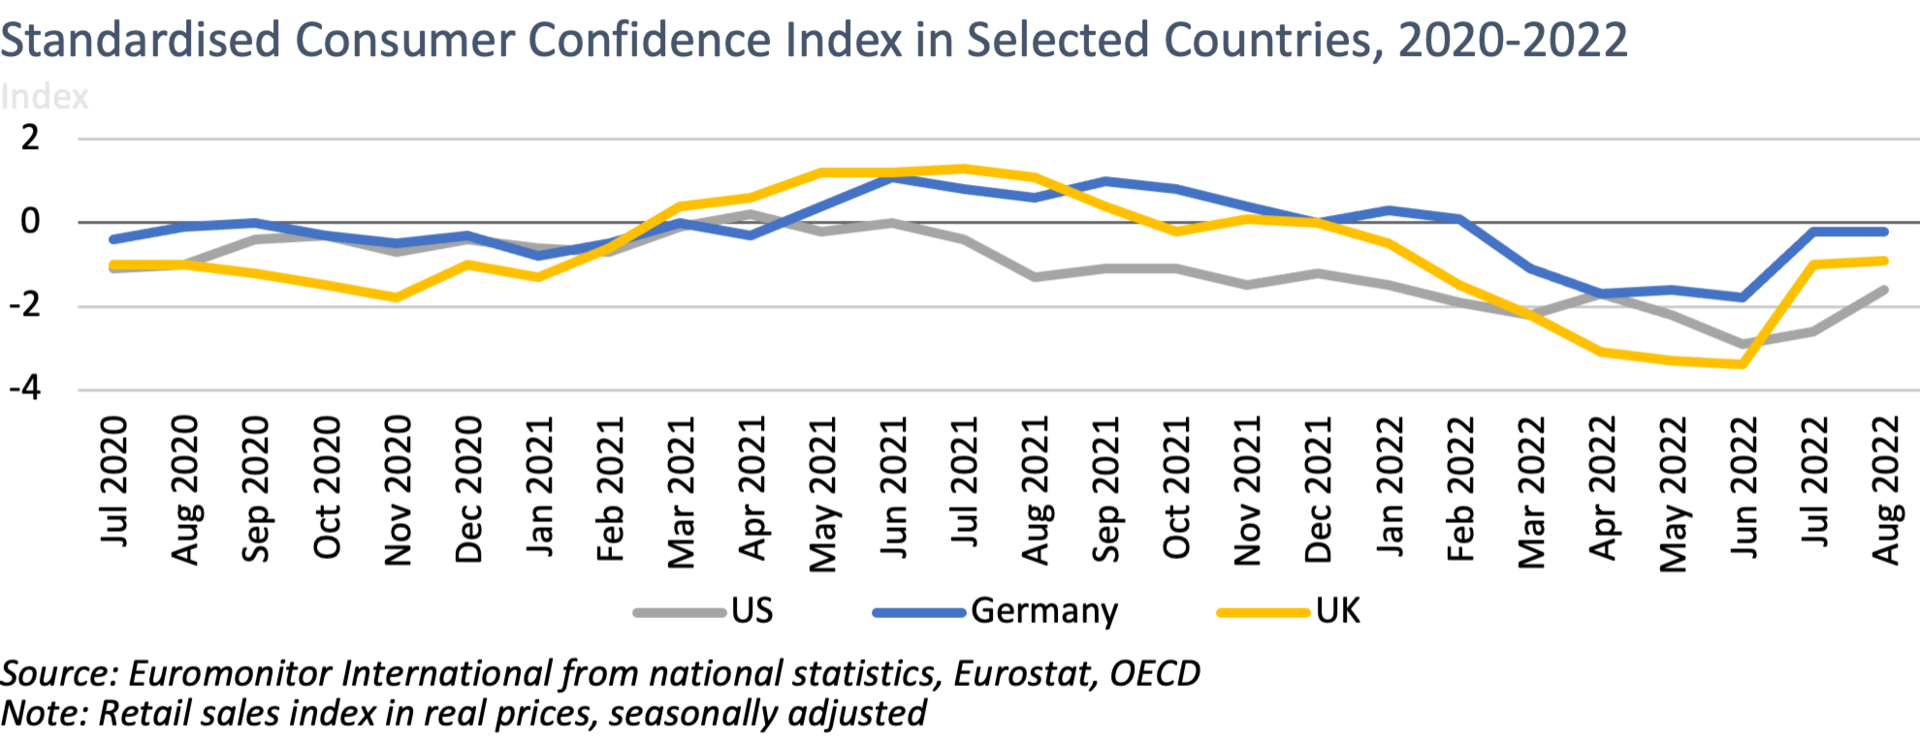 Standardised Consumer Confidence Index in Selected Countries, 2020-2022